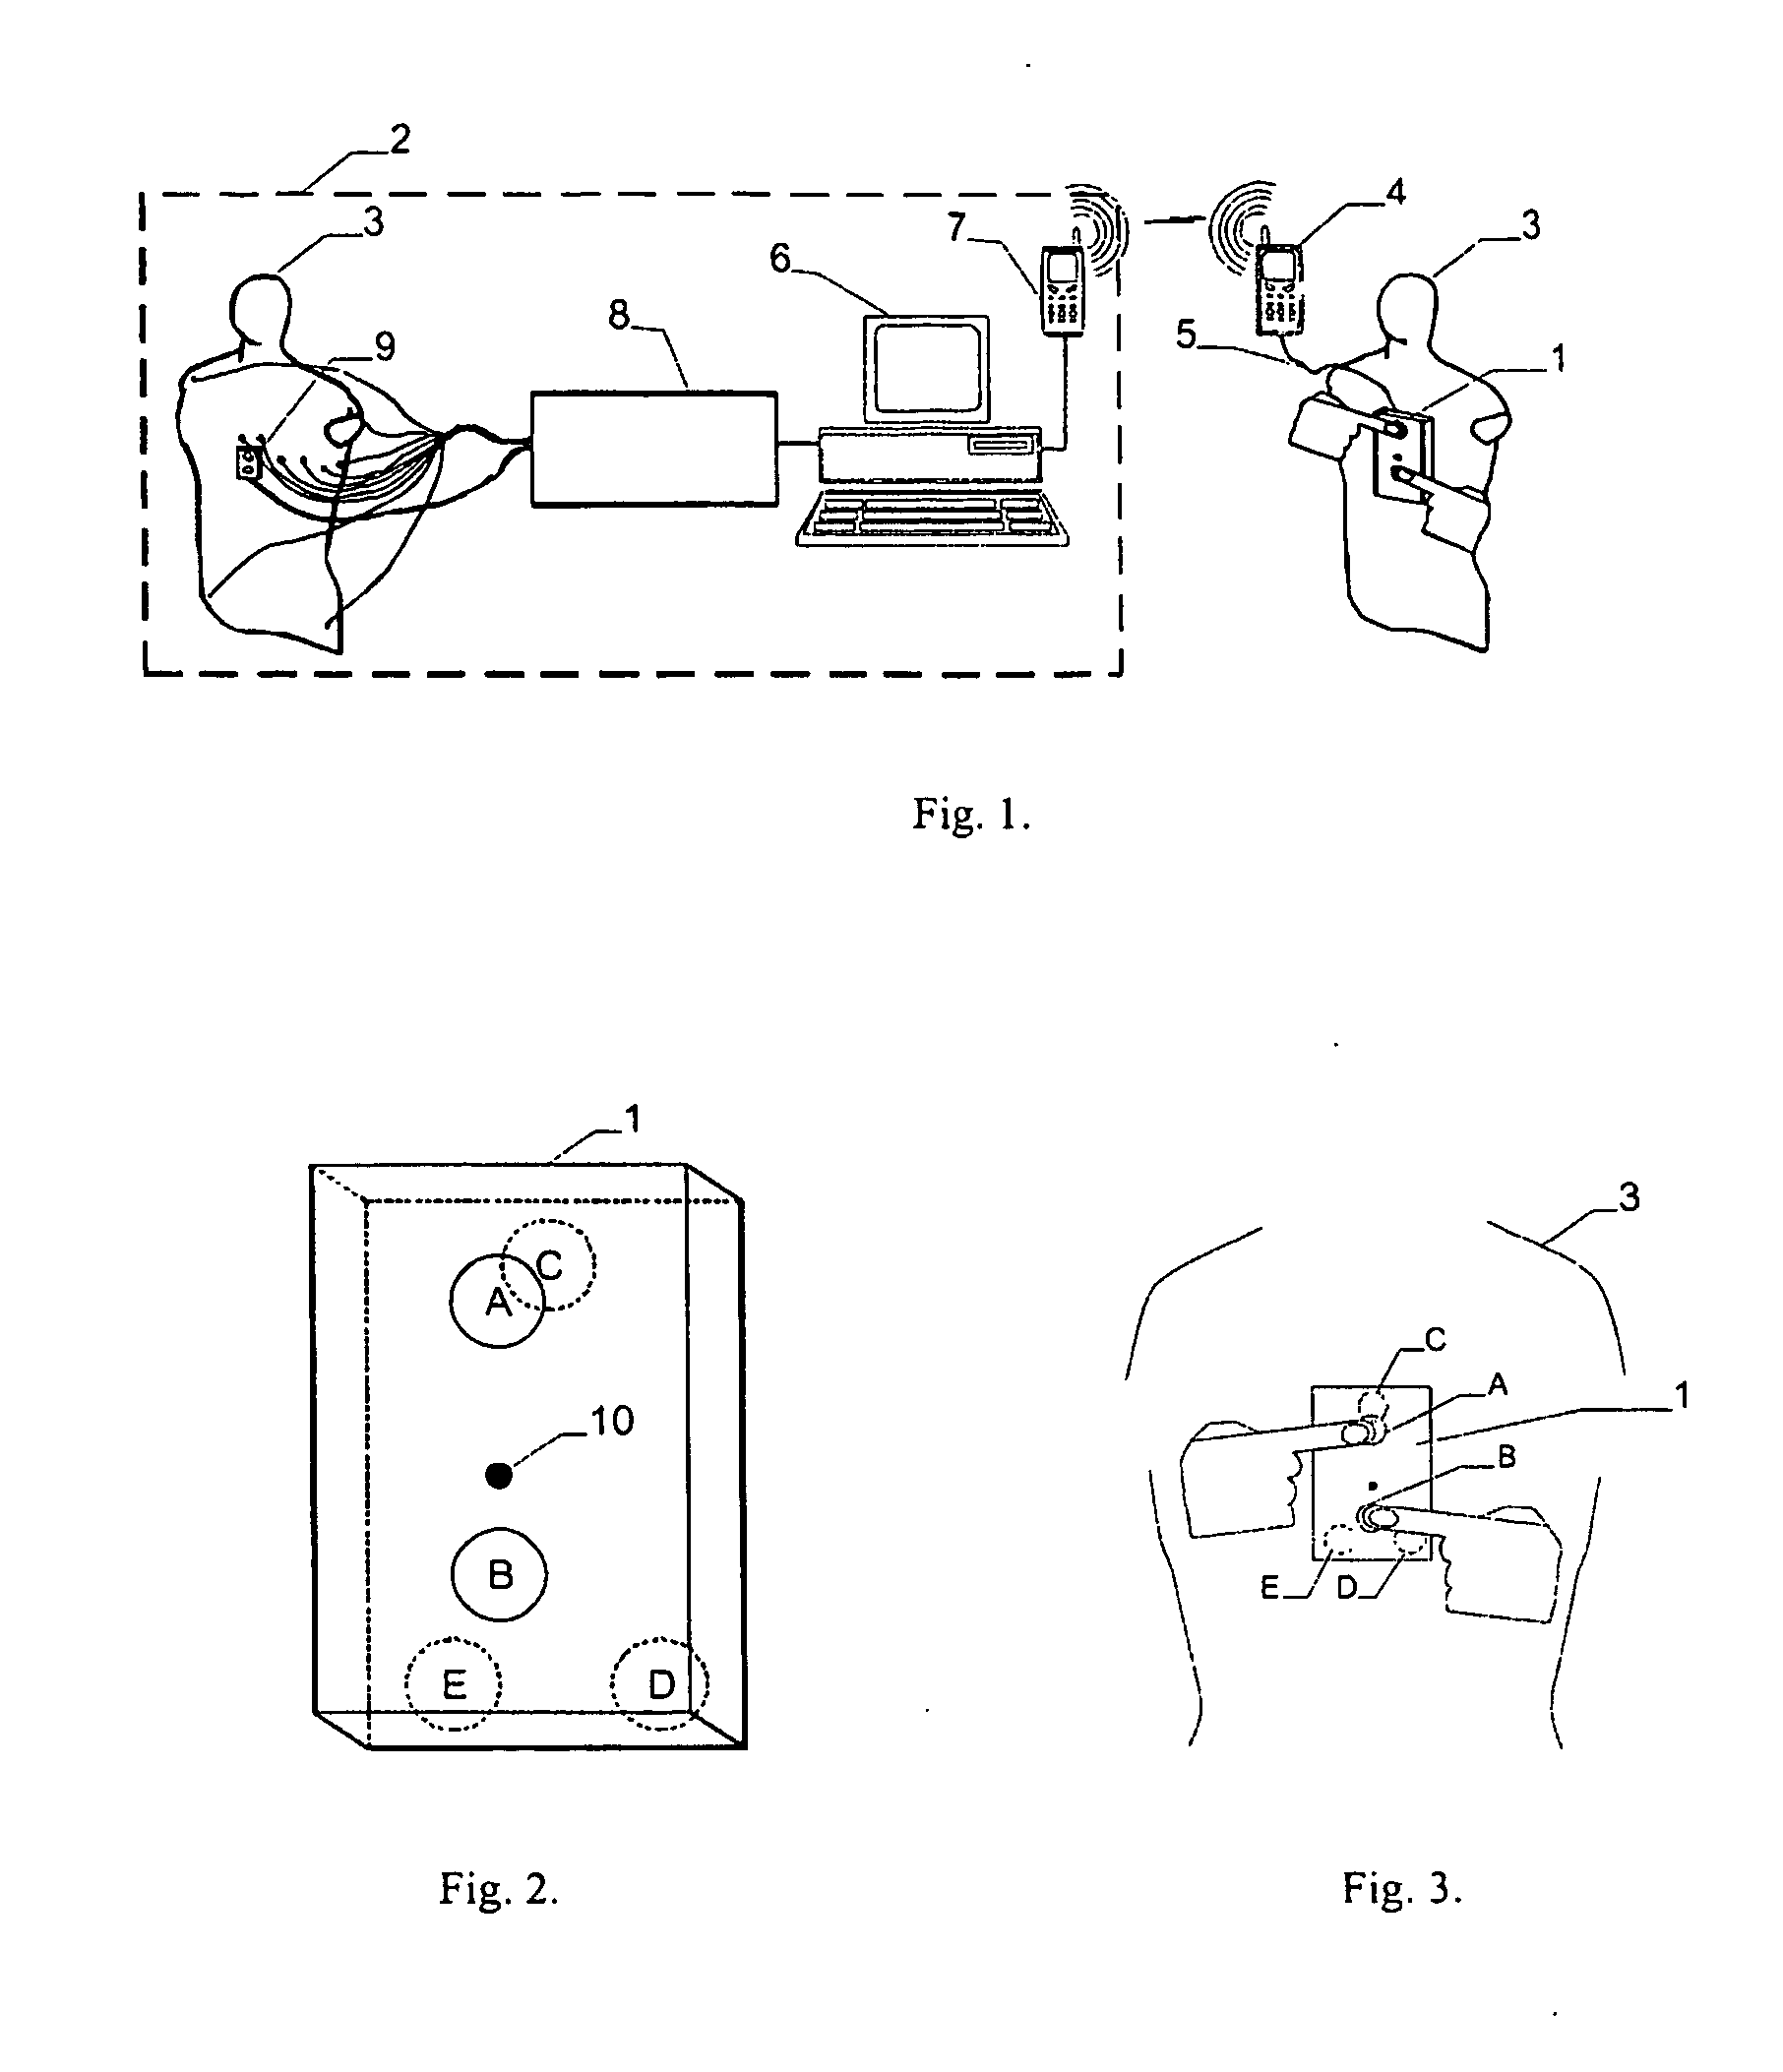 Apparatus and method for cordless recording and telecommunication transmission of three special ecg leads and their processing